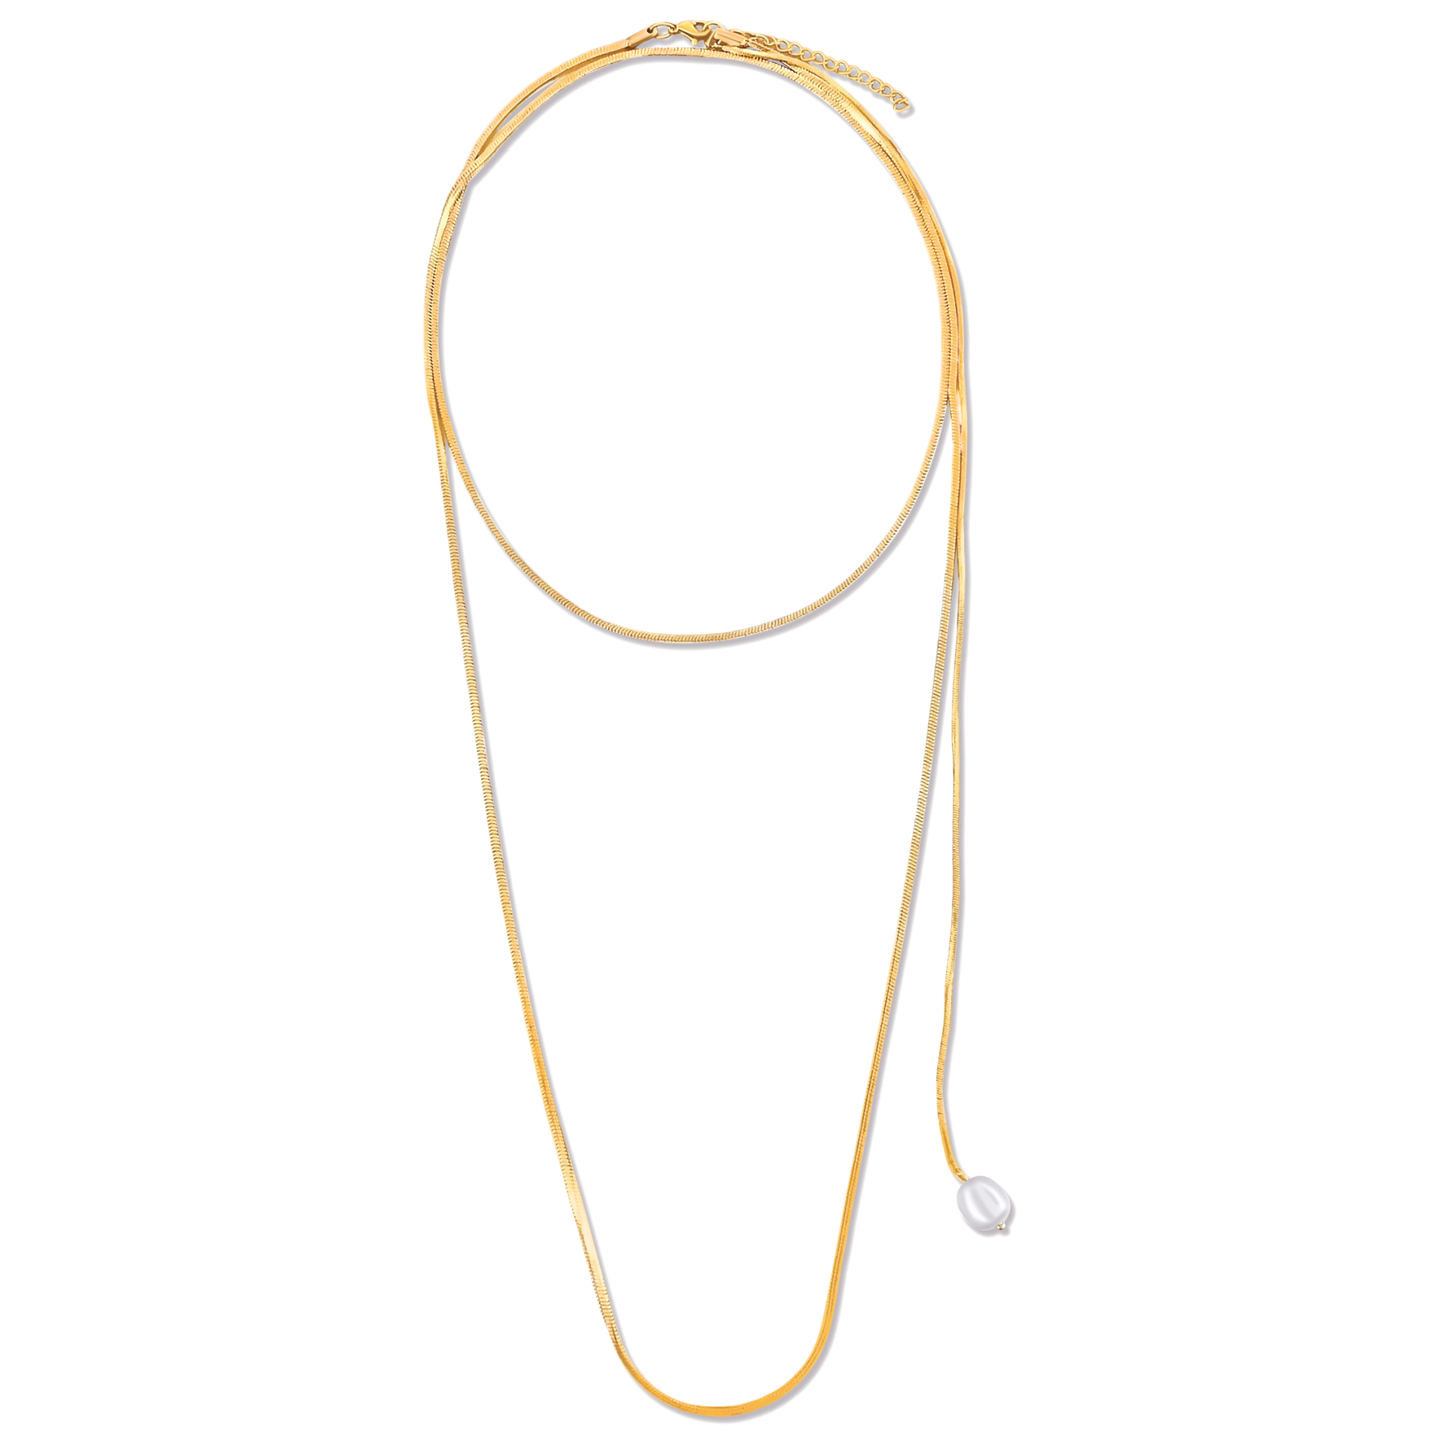 Ellie Vail - Aviana Wrap Snake Chain Pearl Necklace